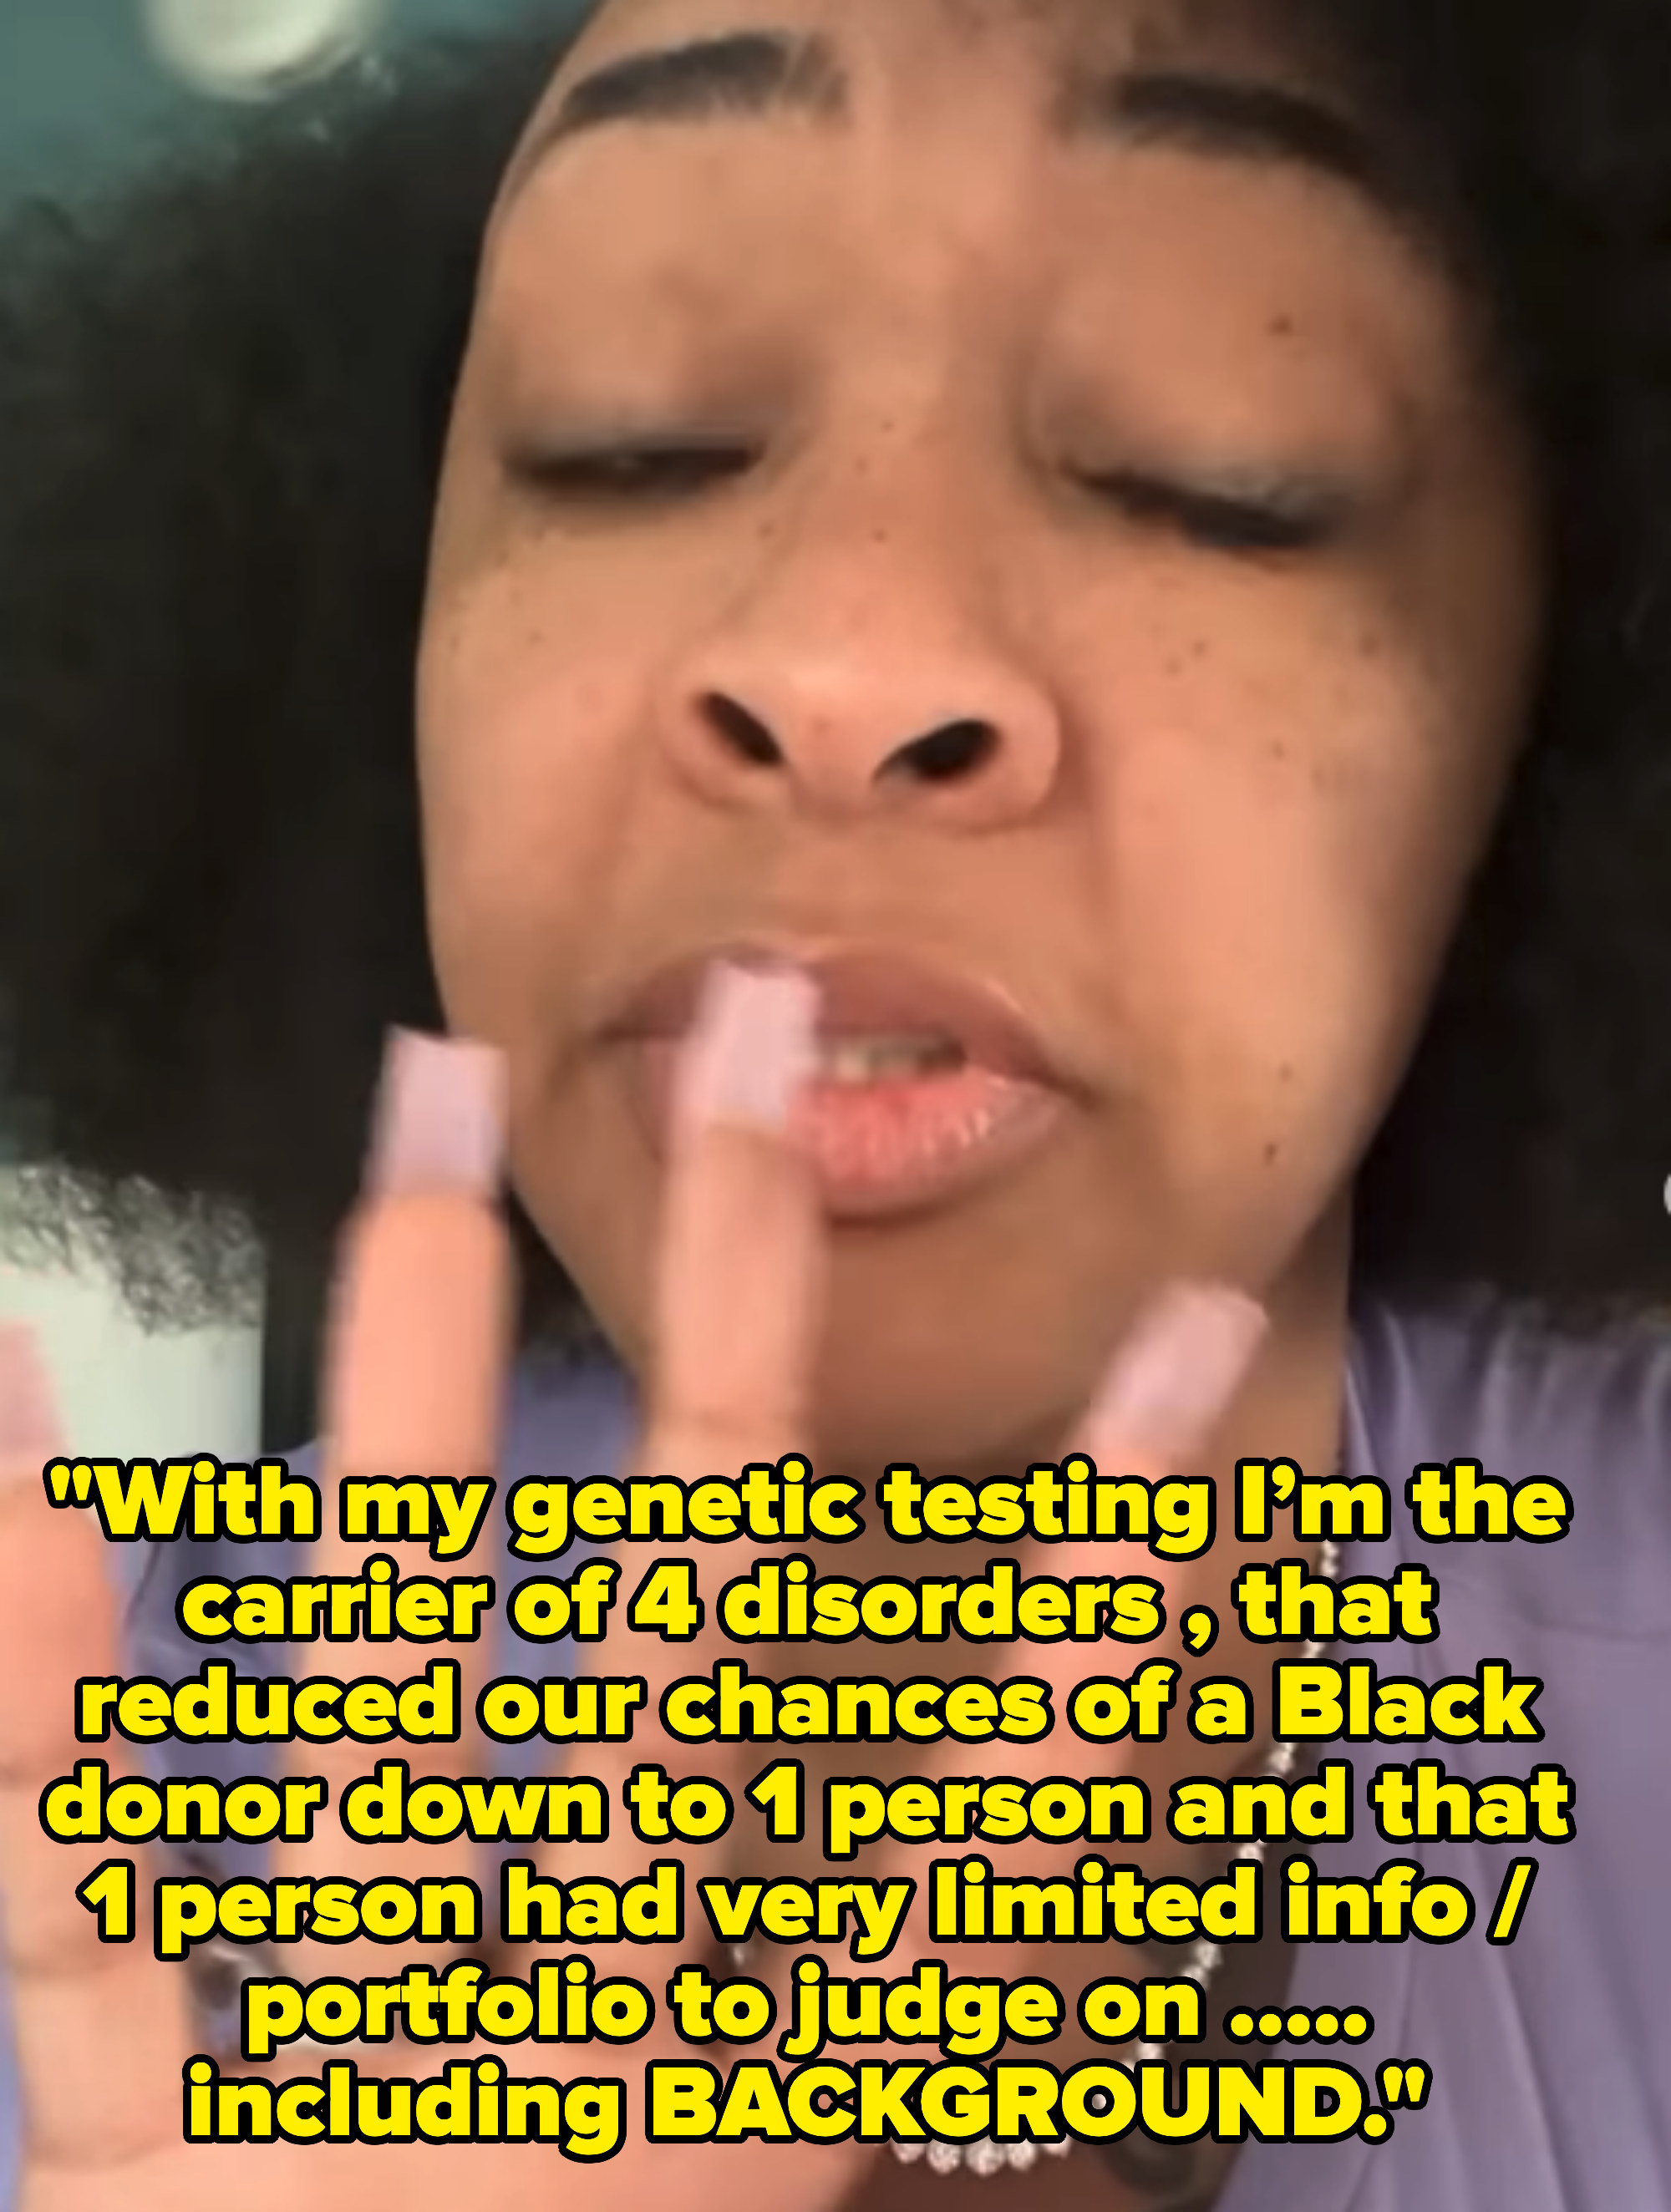 She says that she&#x27;s a carrier of 4 disorders and that reduced their chances of a Black donor down to 1 person and that they had very limited info to judge on